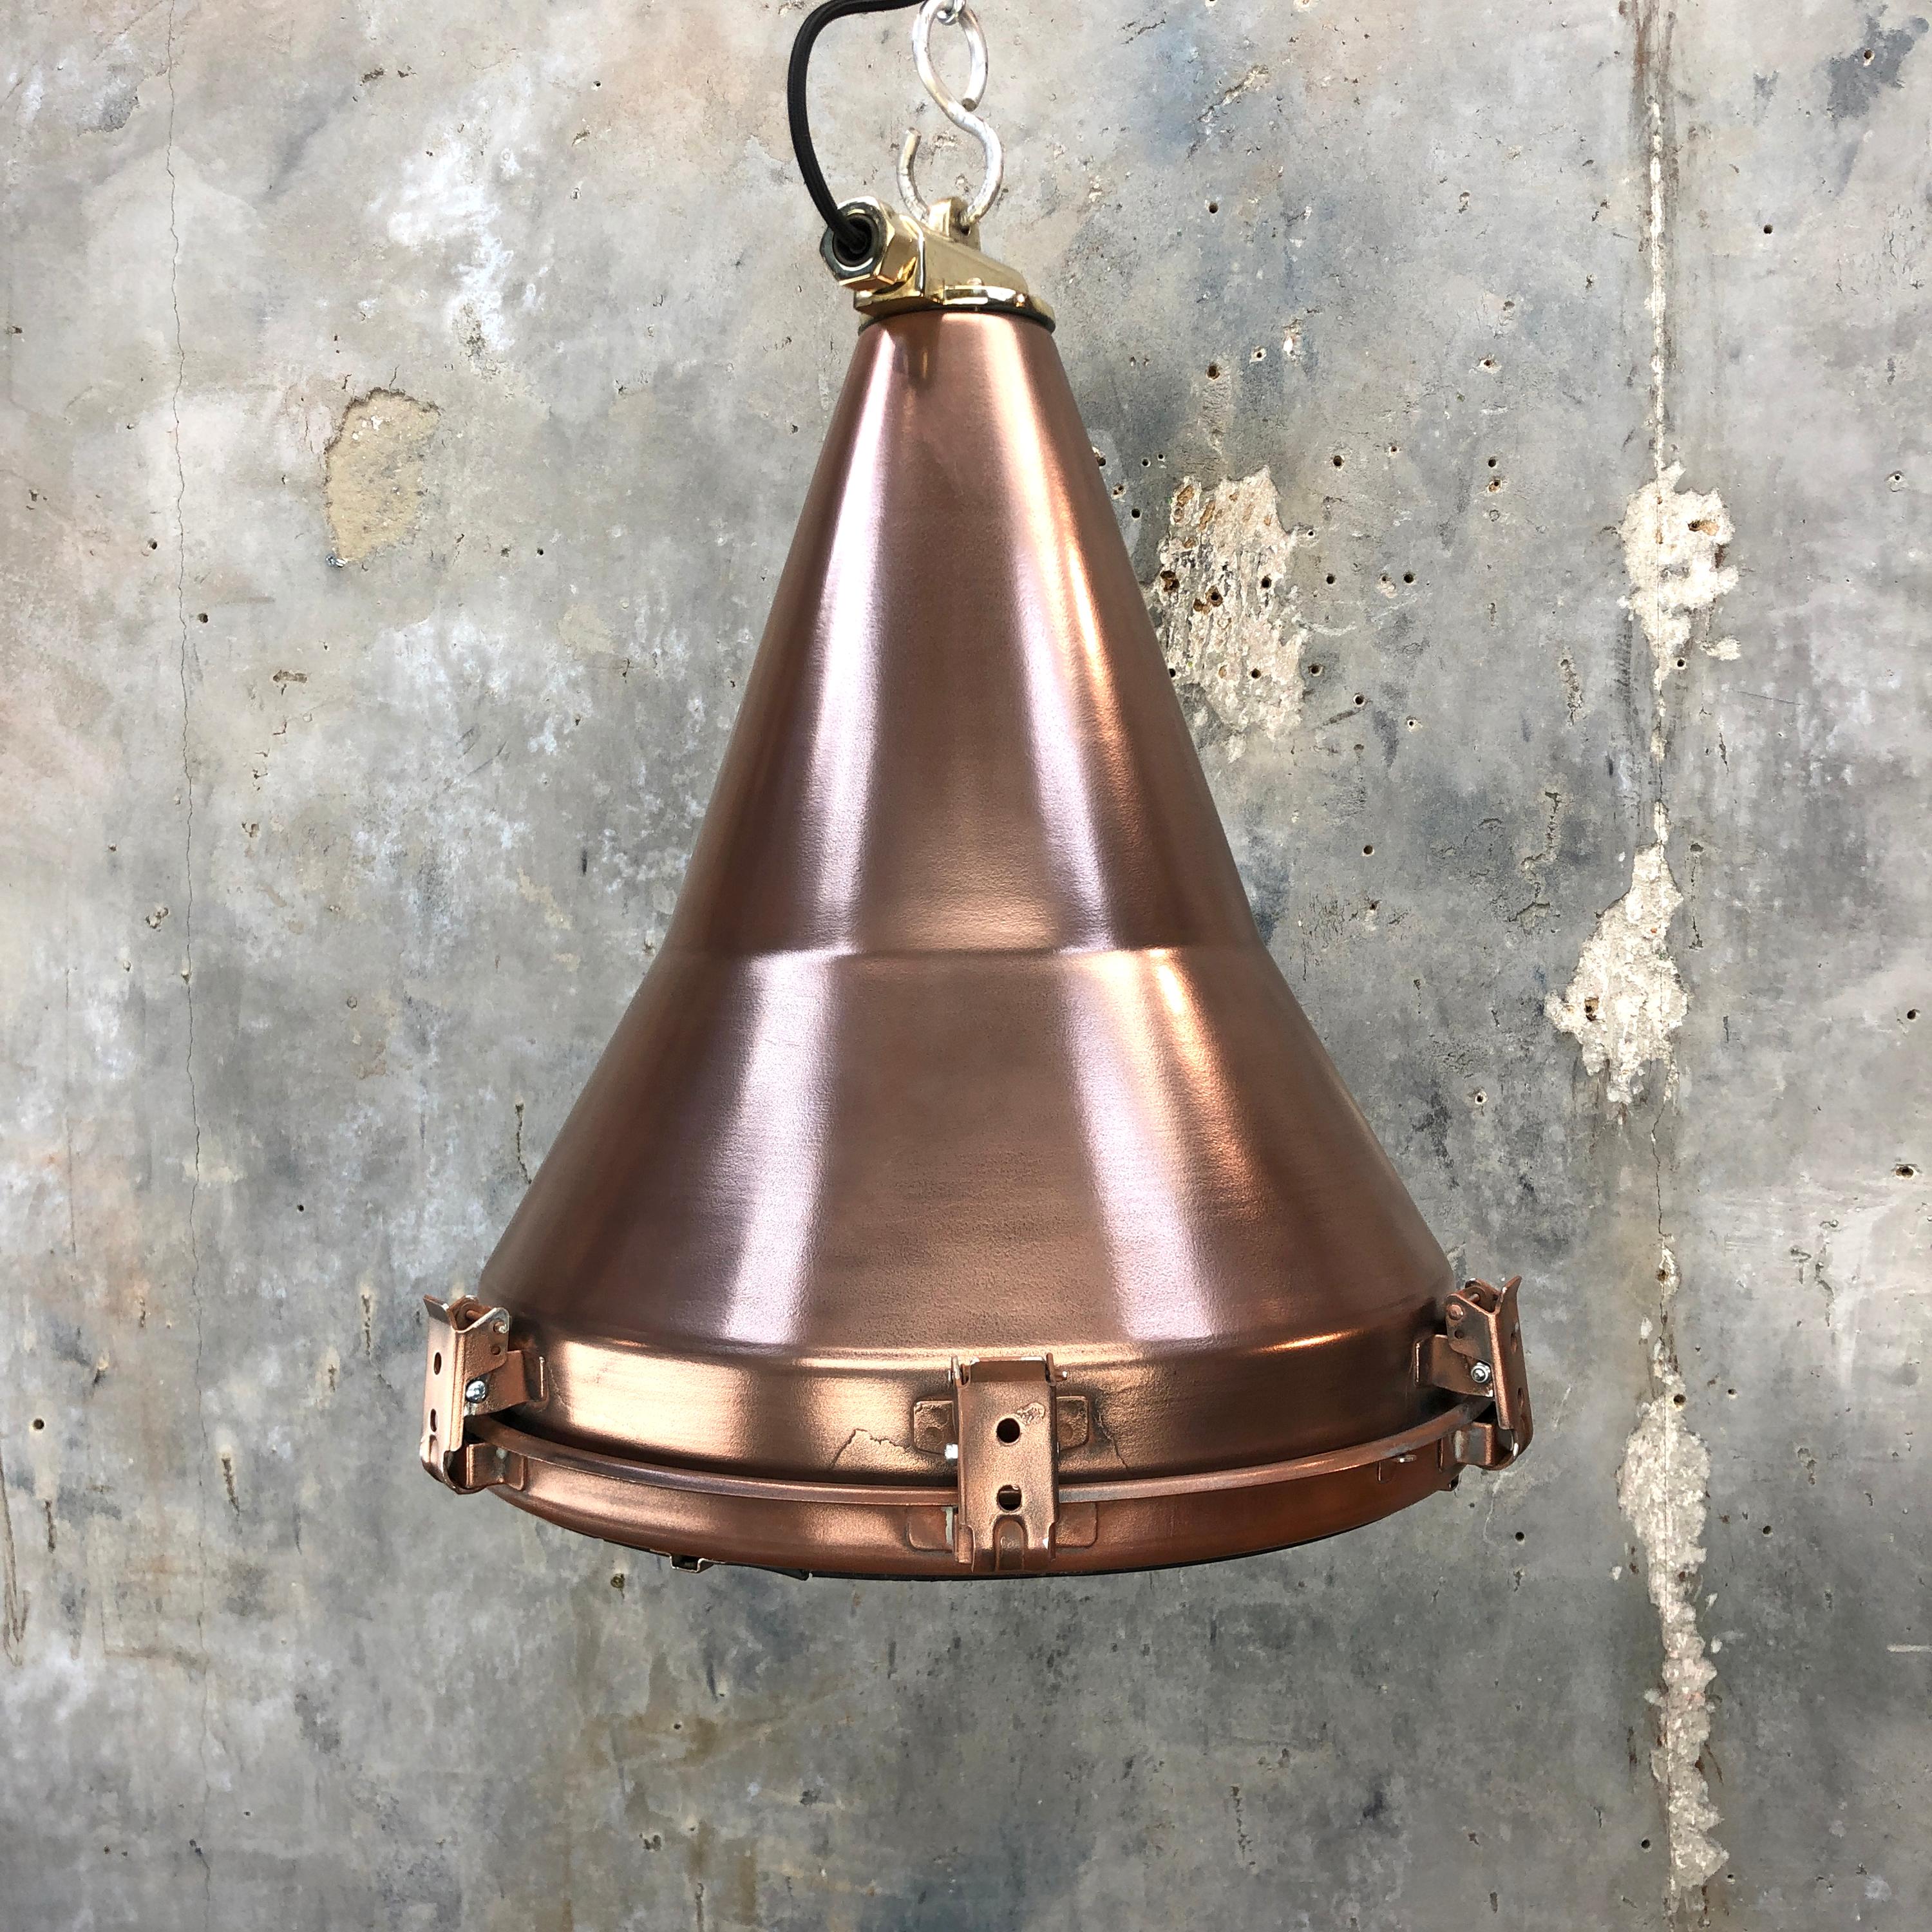 A retro industrial copper ceiling pendant.
 
A reclaimed Korean light fixture reclaimed from decommissioned cargo ships, circa 1970. 

Originally used on masts and gantries to flood light the container deck.
 
Specifications
Measures: